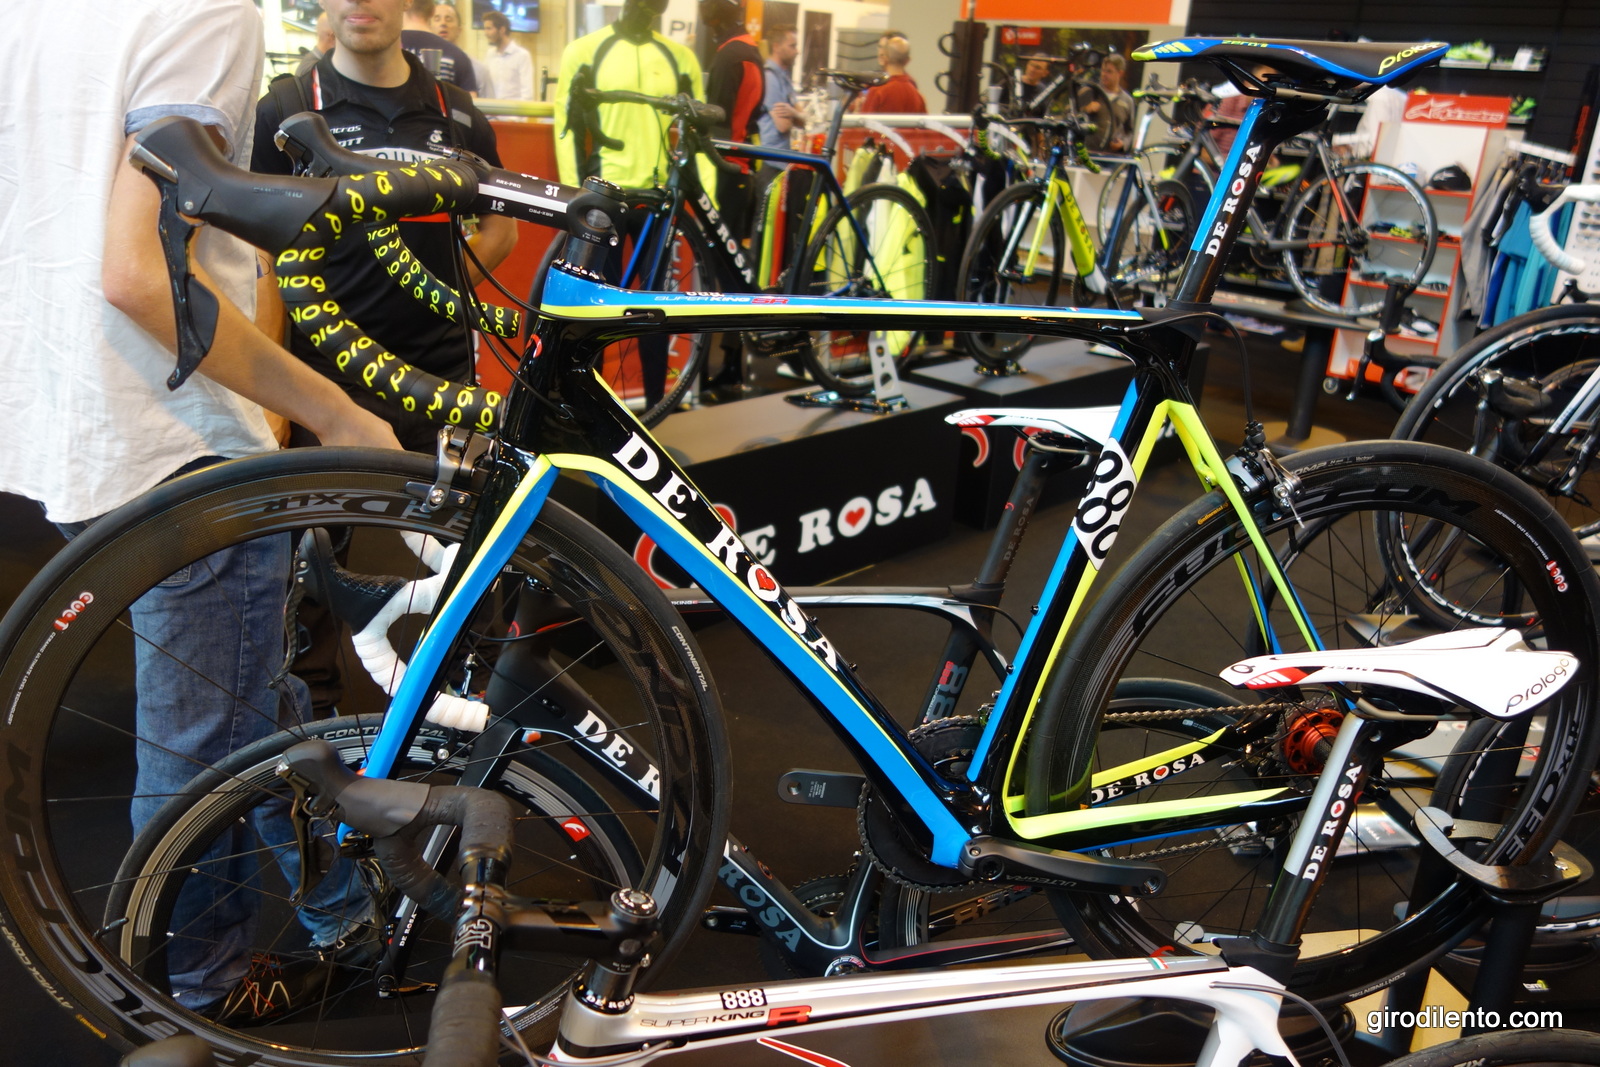 Loved the colour of this De Rosa